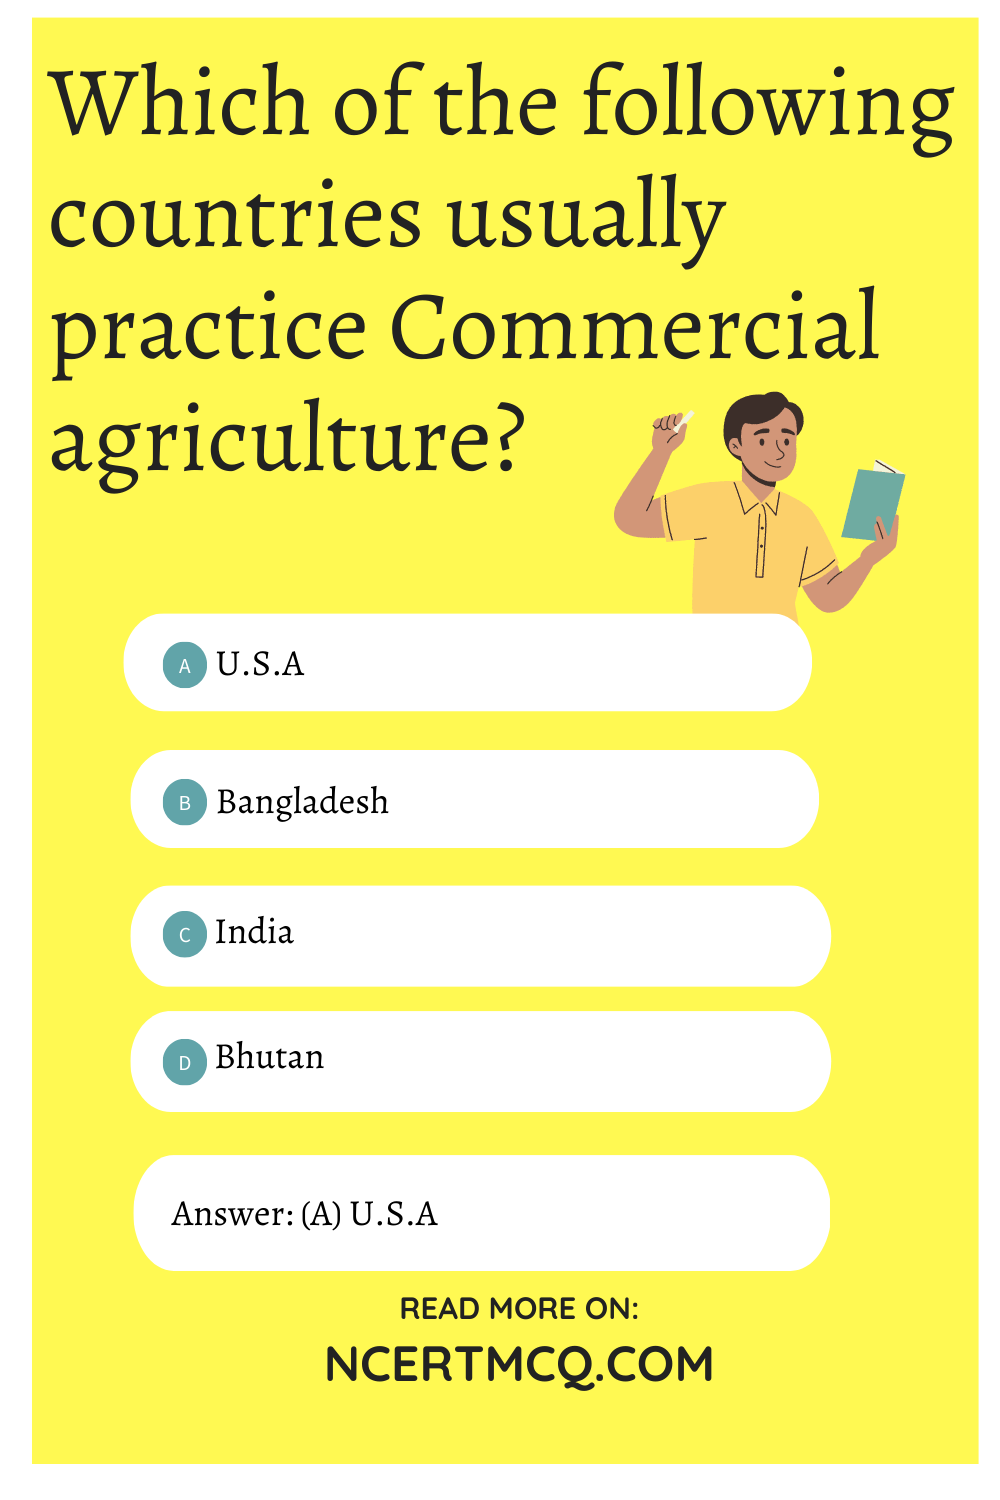 Which of the following countries usually practice Commercial agriculture?